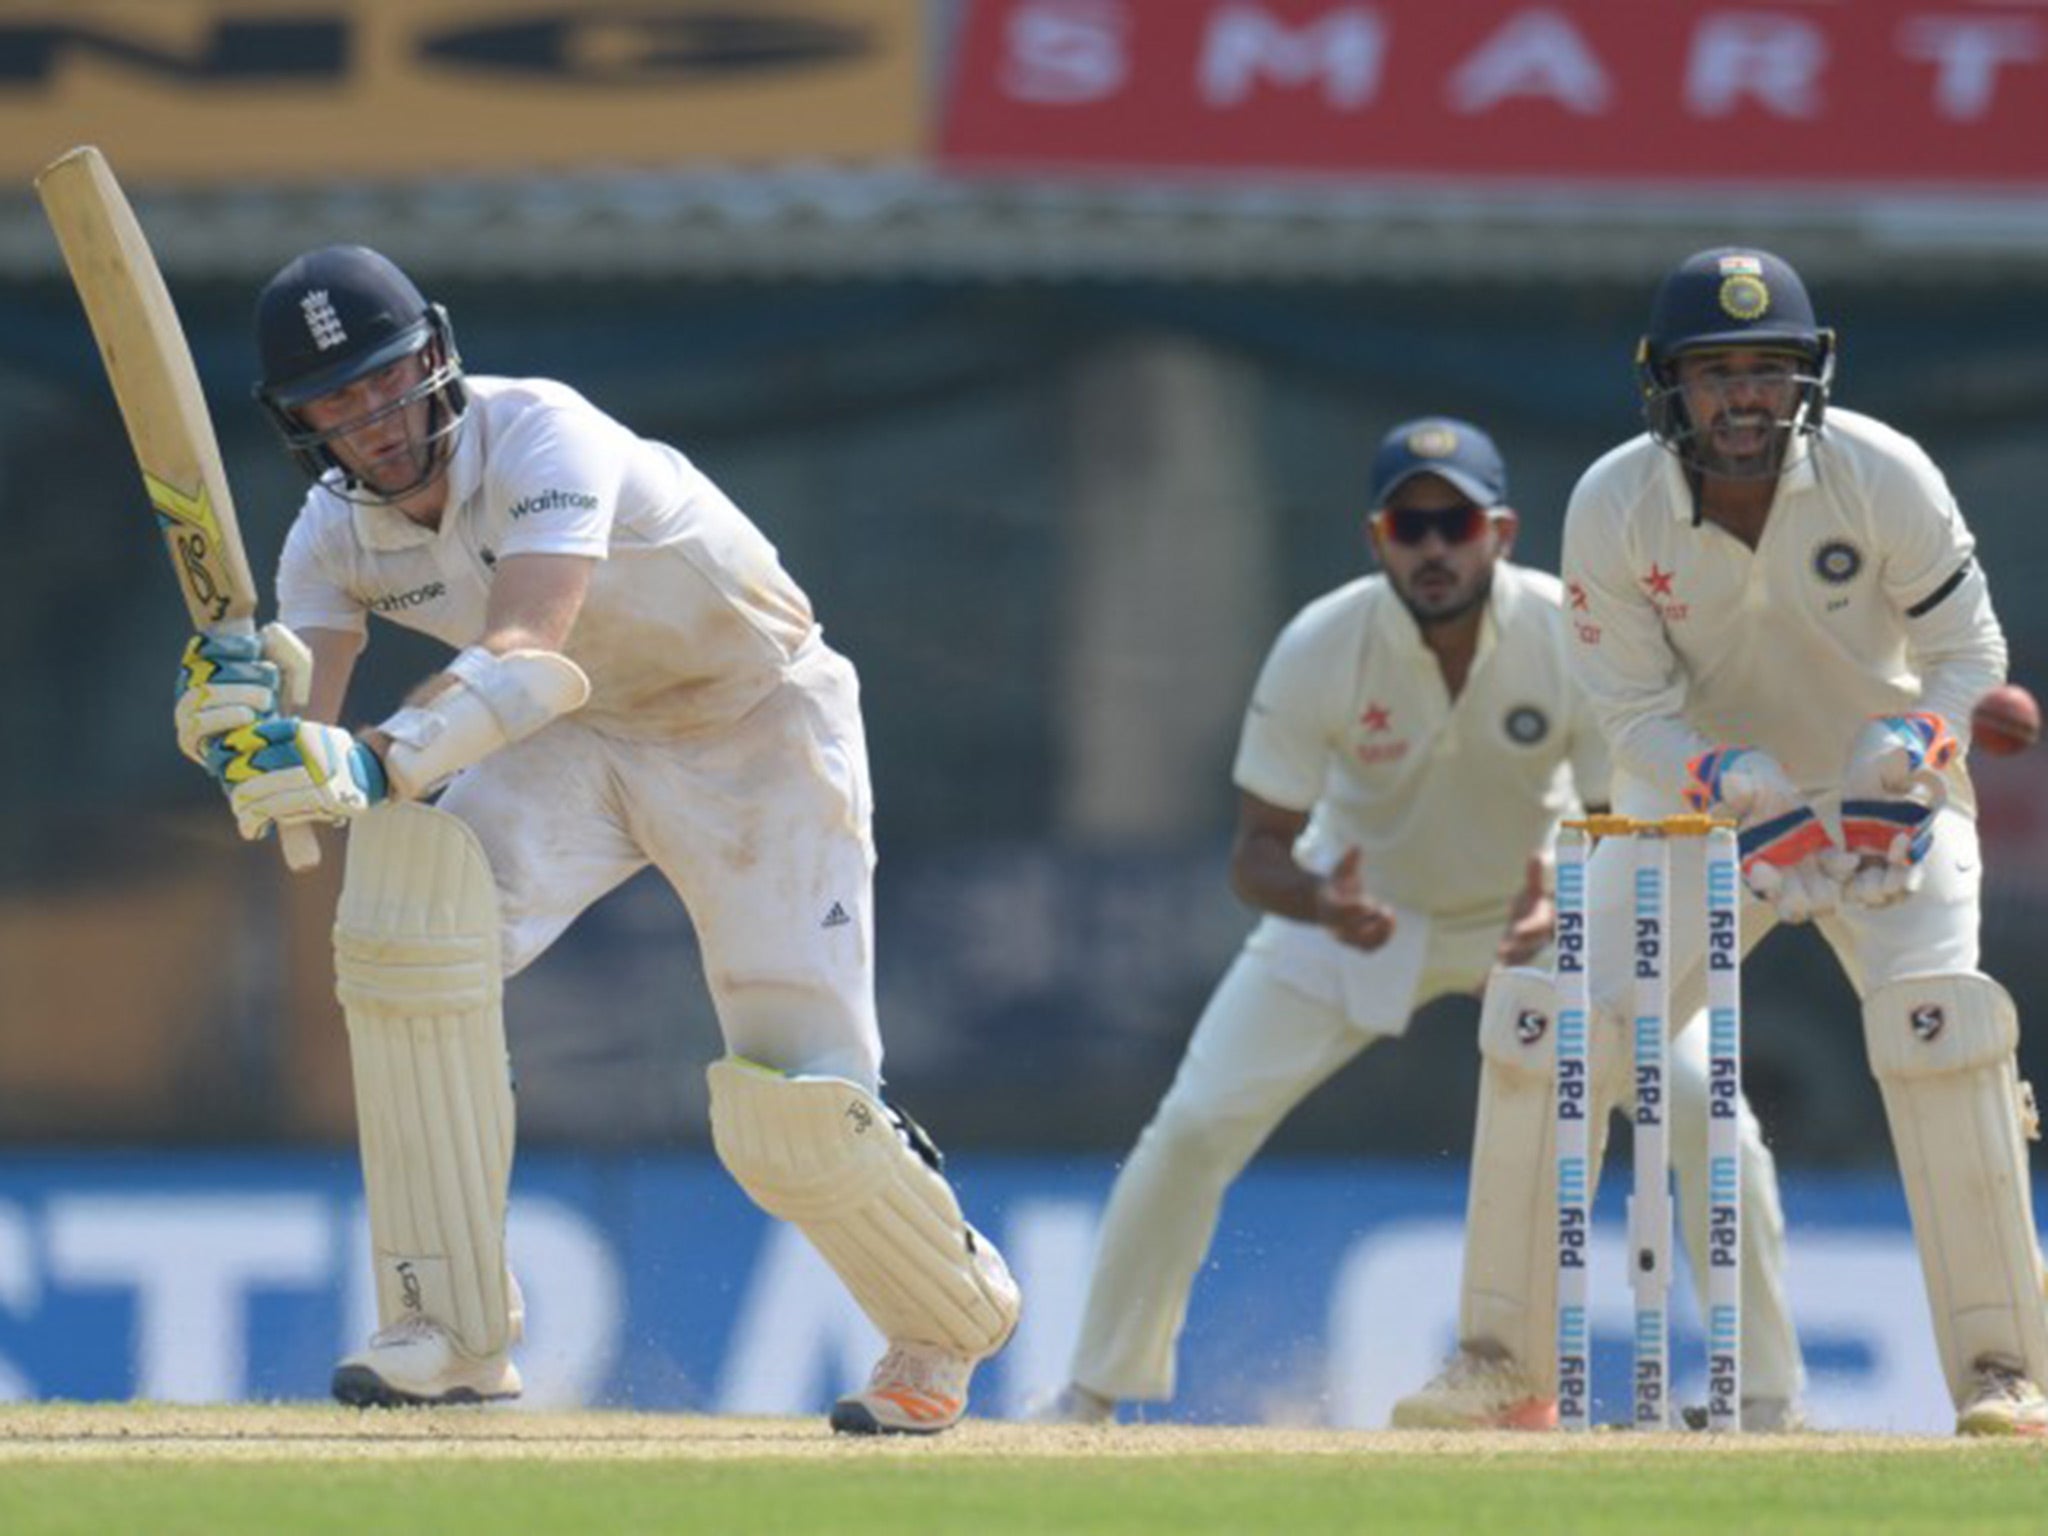 Dawson performed admirably in his first Test innings, finishing unbeaten